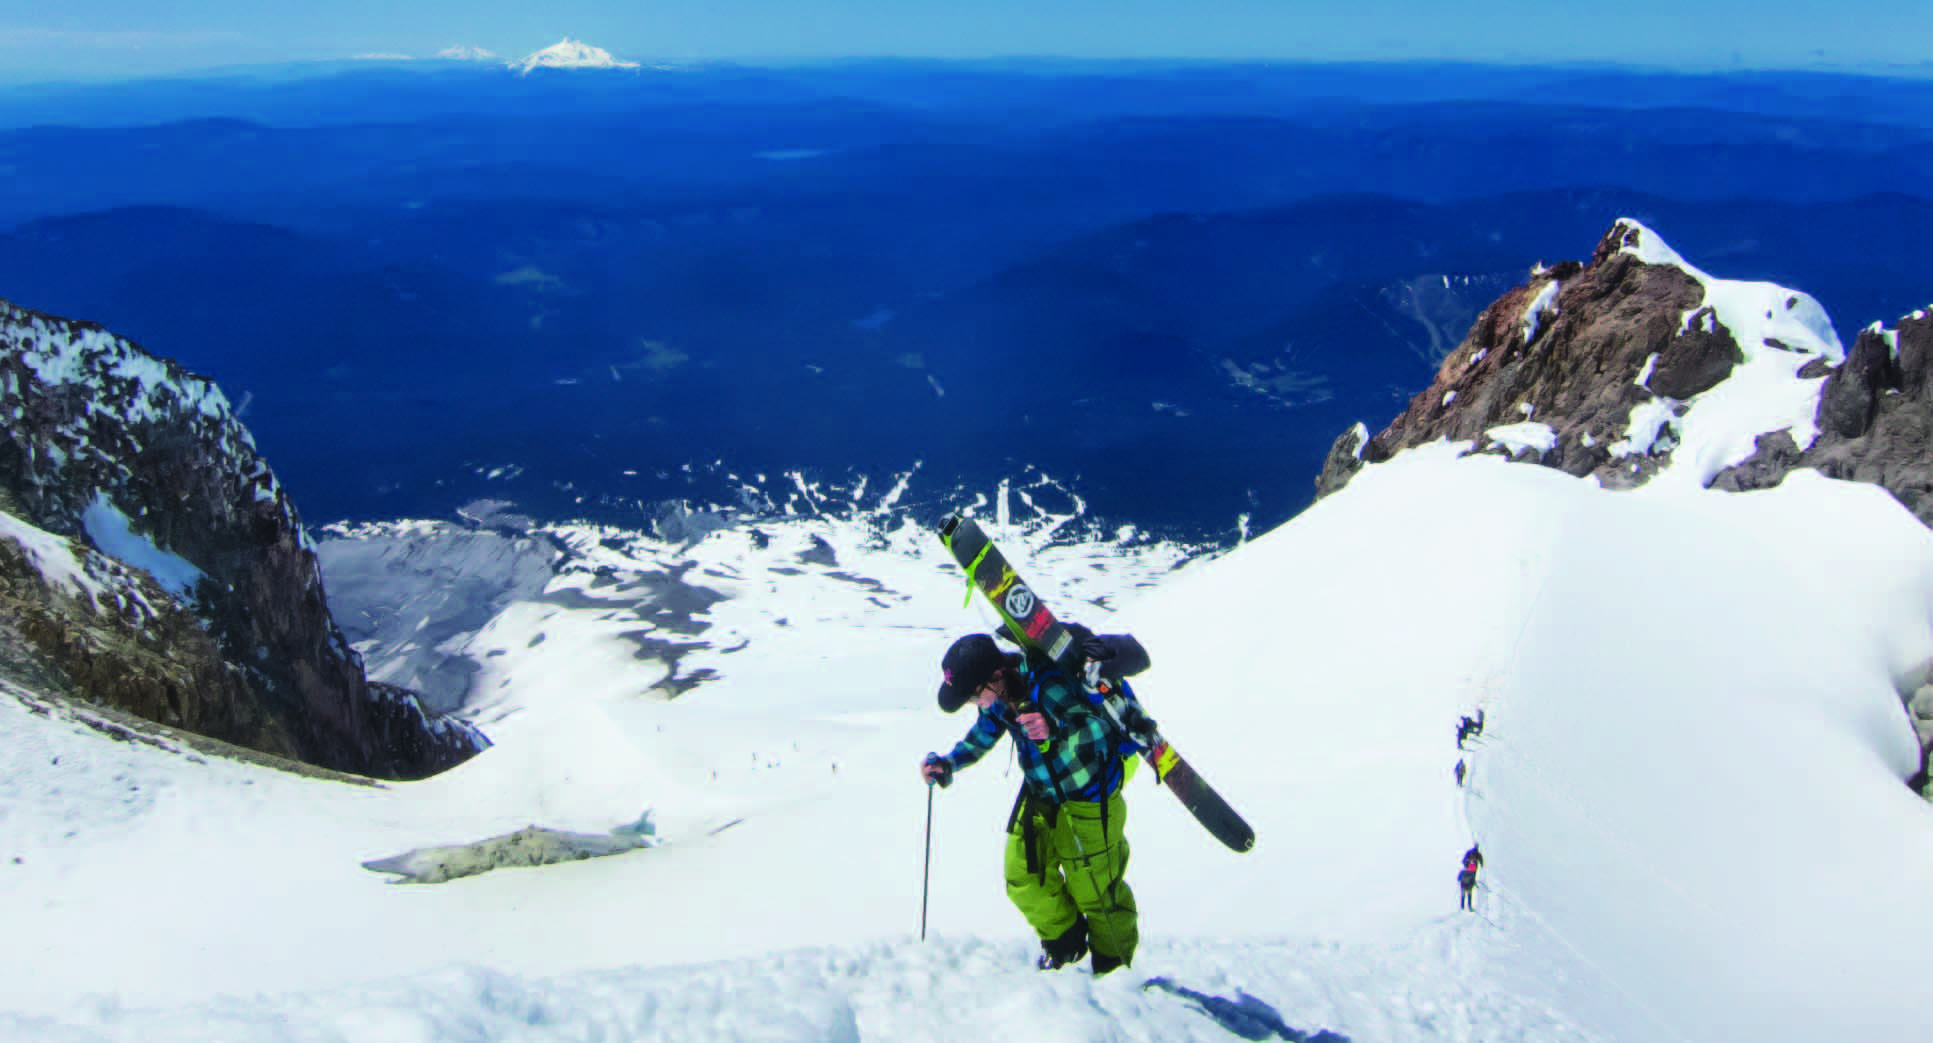 Earn your turns and epic mountain views